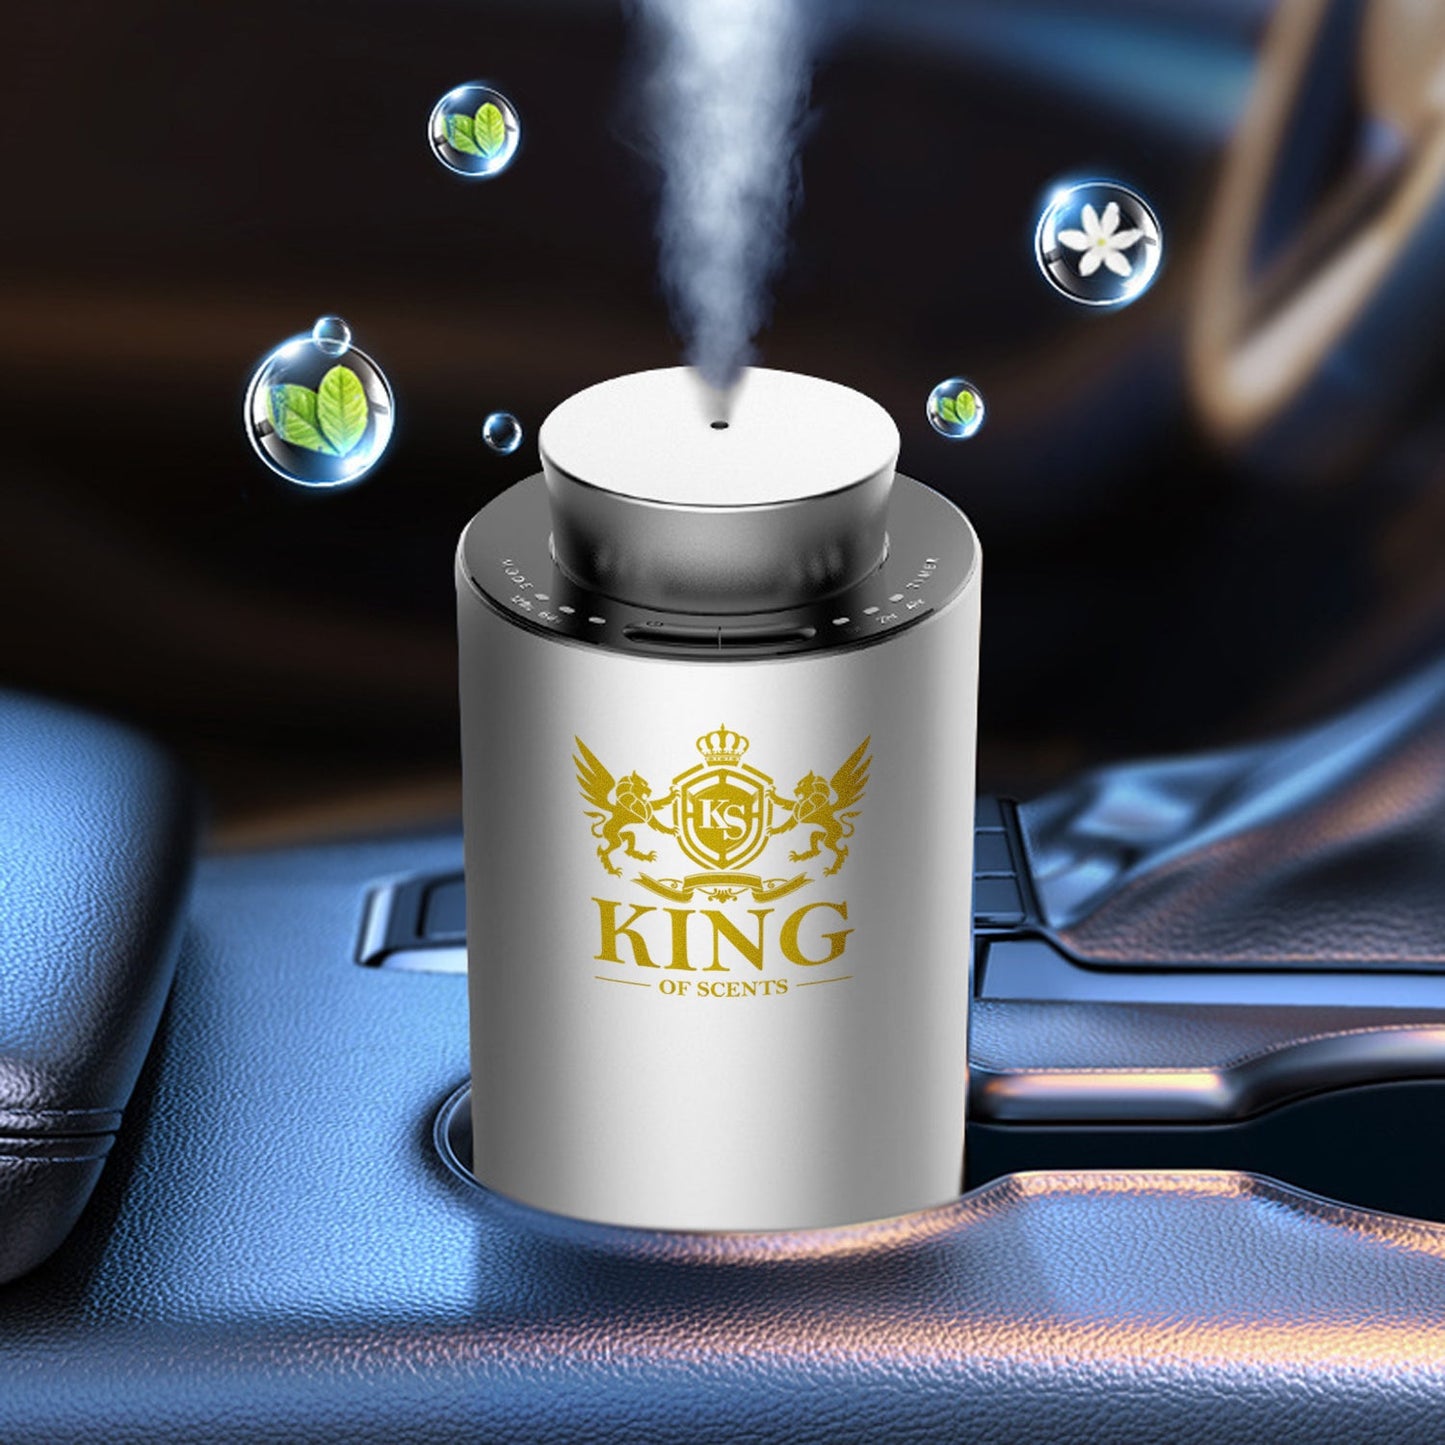 King Of Scents  Aroma Essential Oils  Diffuser Operated Cordless Nebulizer Car Diffusers for Essential Oils Large Room Hotel Travel Easter Gift(Included oil10ml-4 Color) - Silver (Pack of 3)